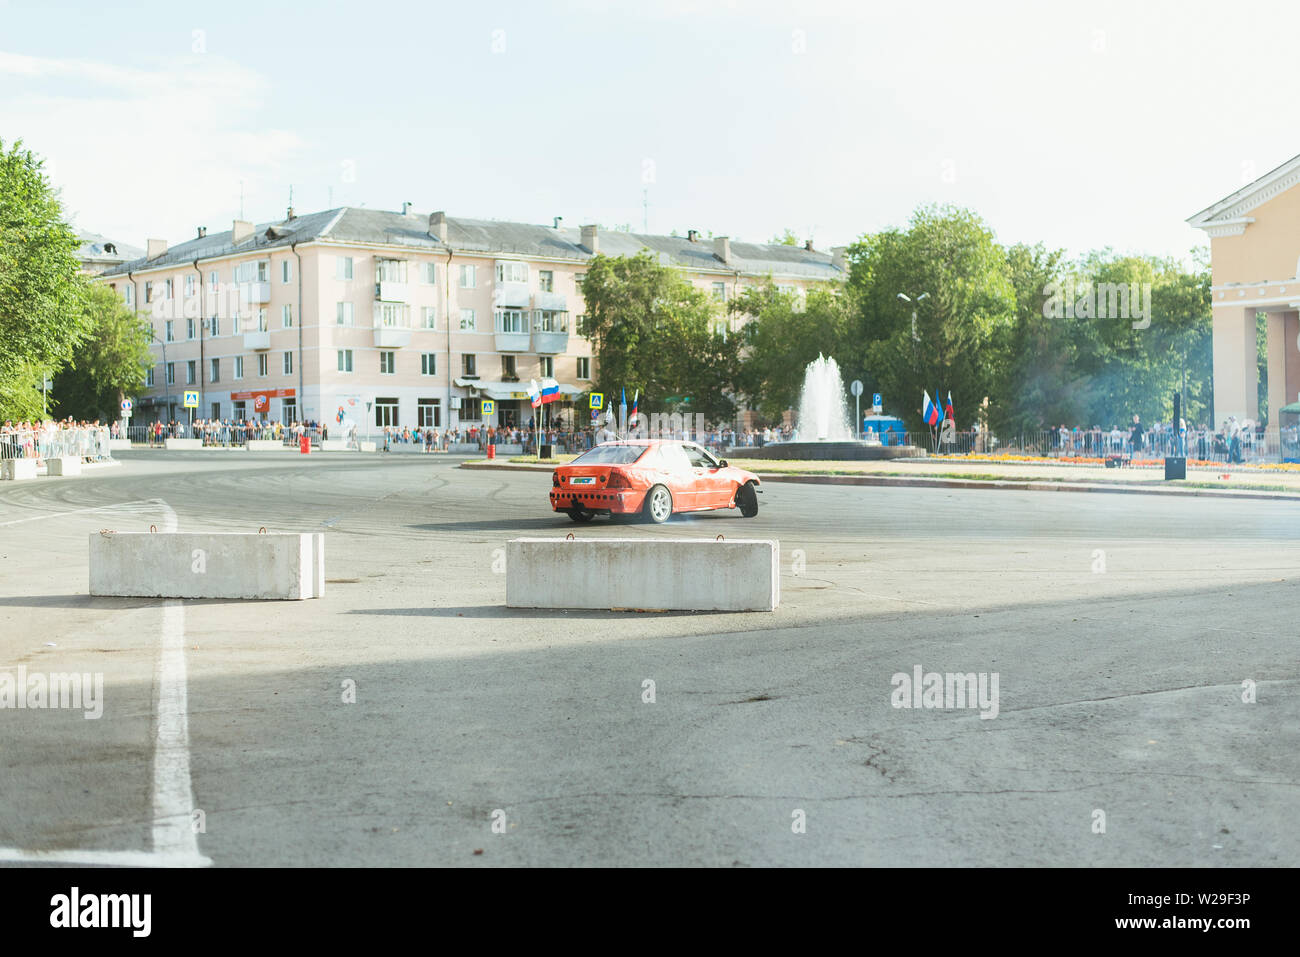 Samara Russia - 07.05.19 Youth Day in Russia. People in the square look like a car drift on the roads. Smoke from under the tires of a red car. Stock Photo